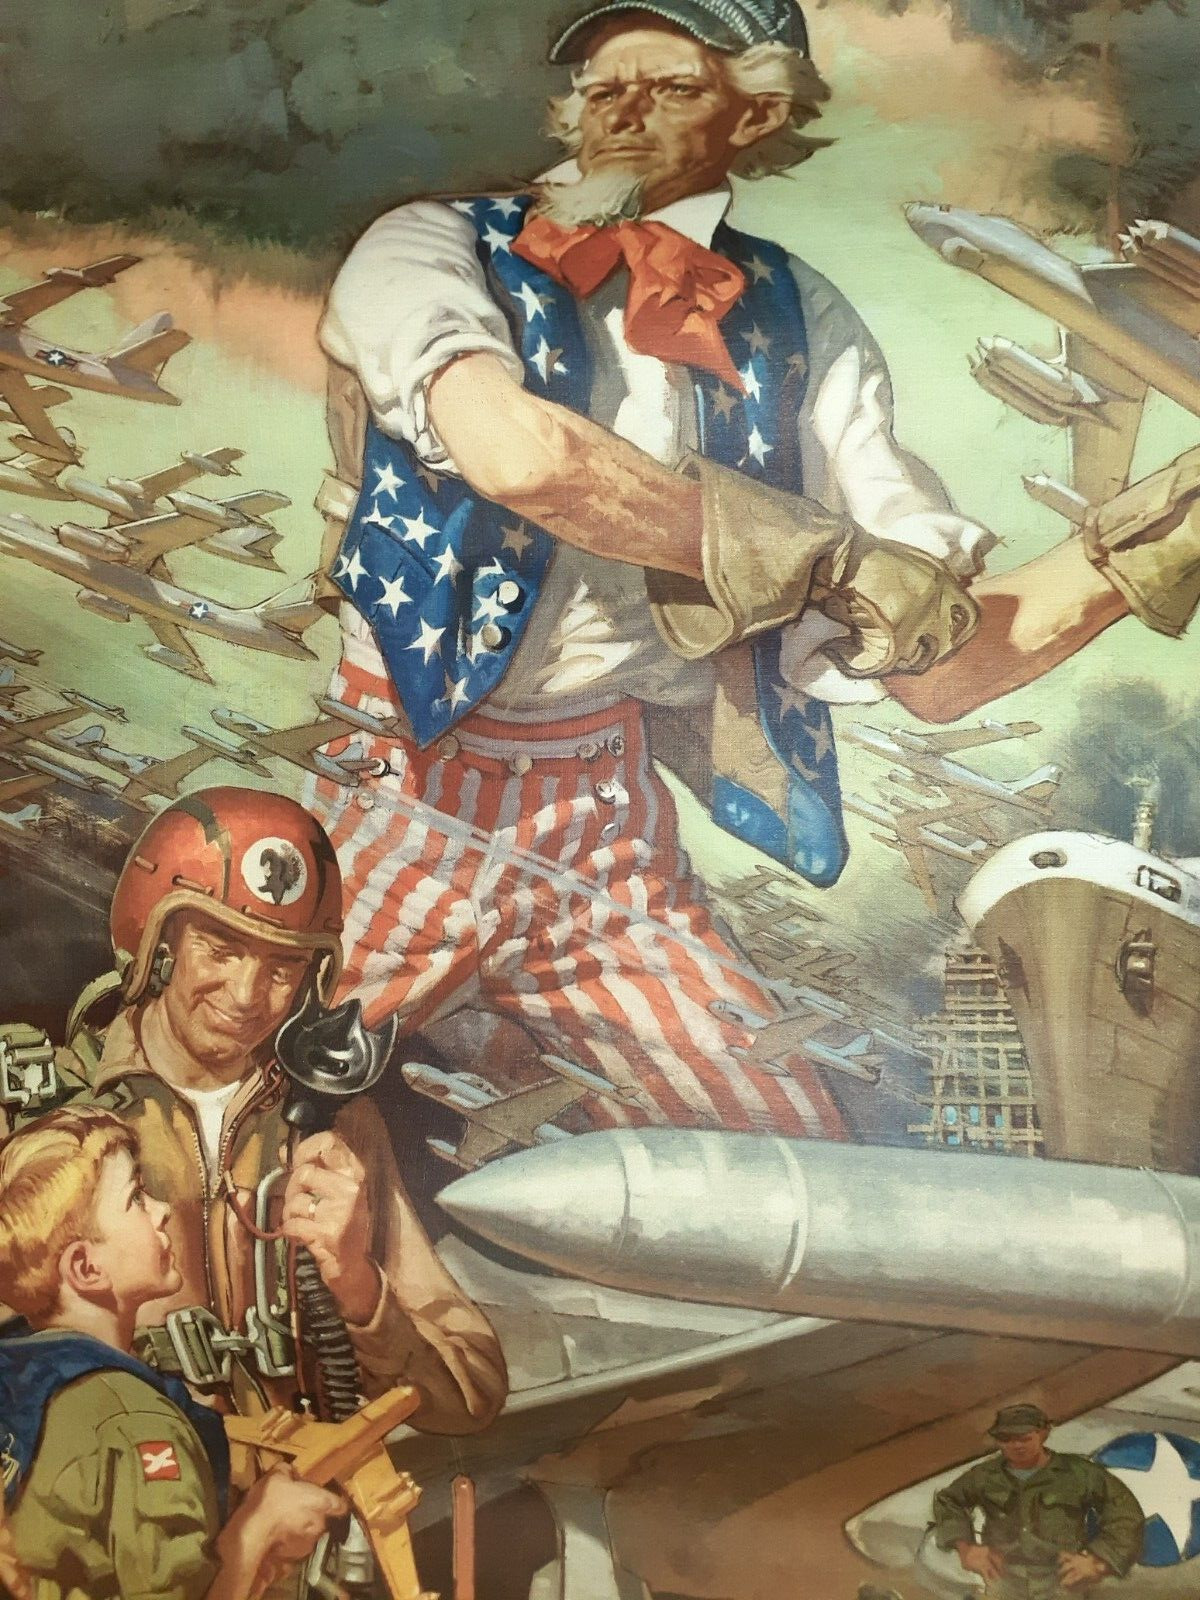 Rare Original Dean Cornwell Uncle Sam Throwing Air Force Plane 1950s Poster